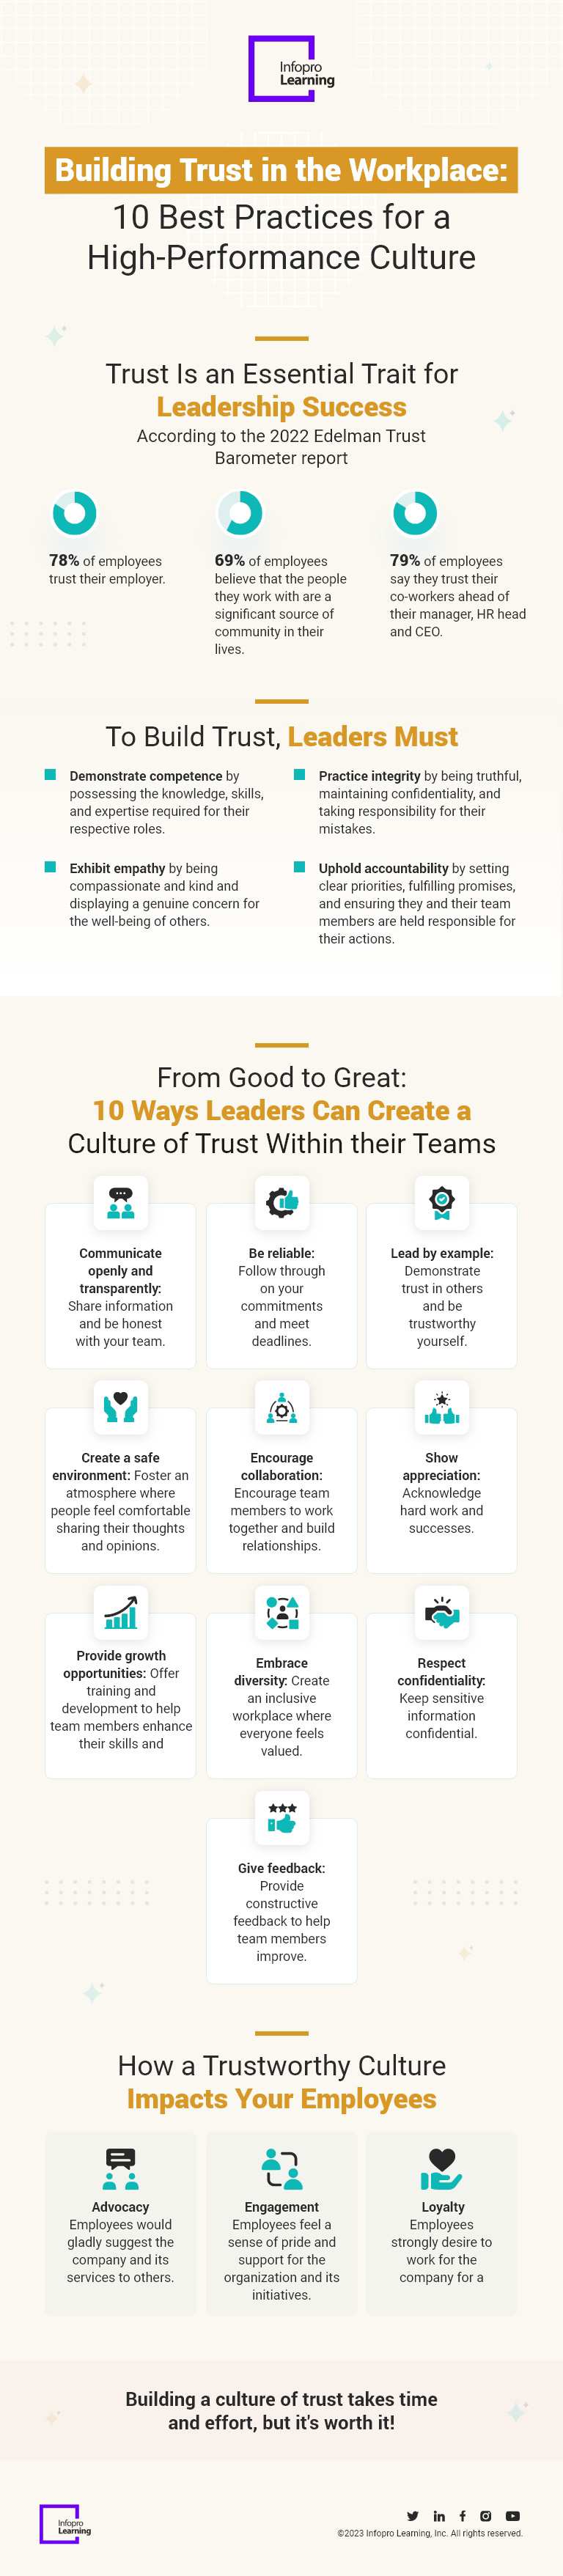 Building Trust in the Workplace 10 Best Practices for a High-Performance Culture